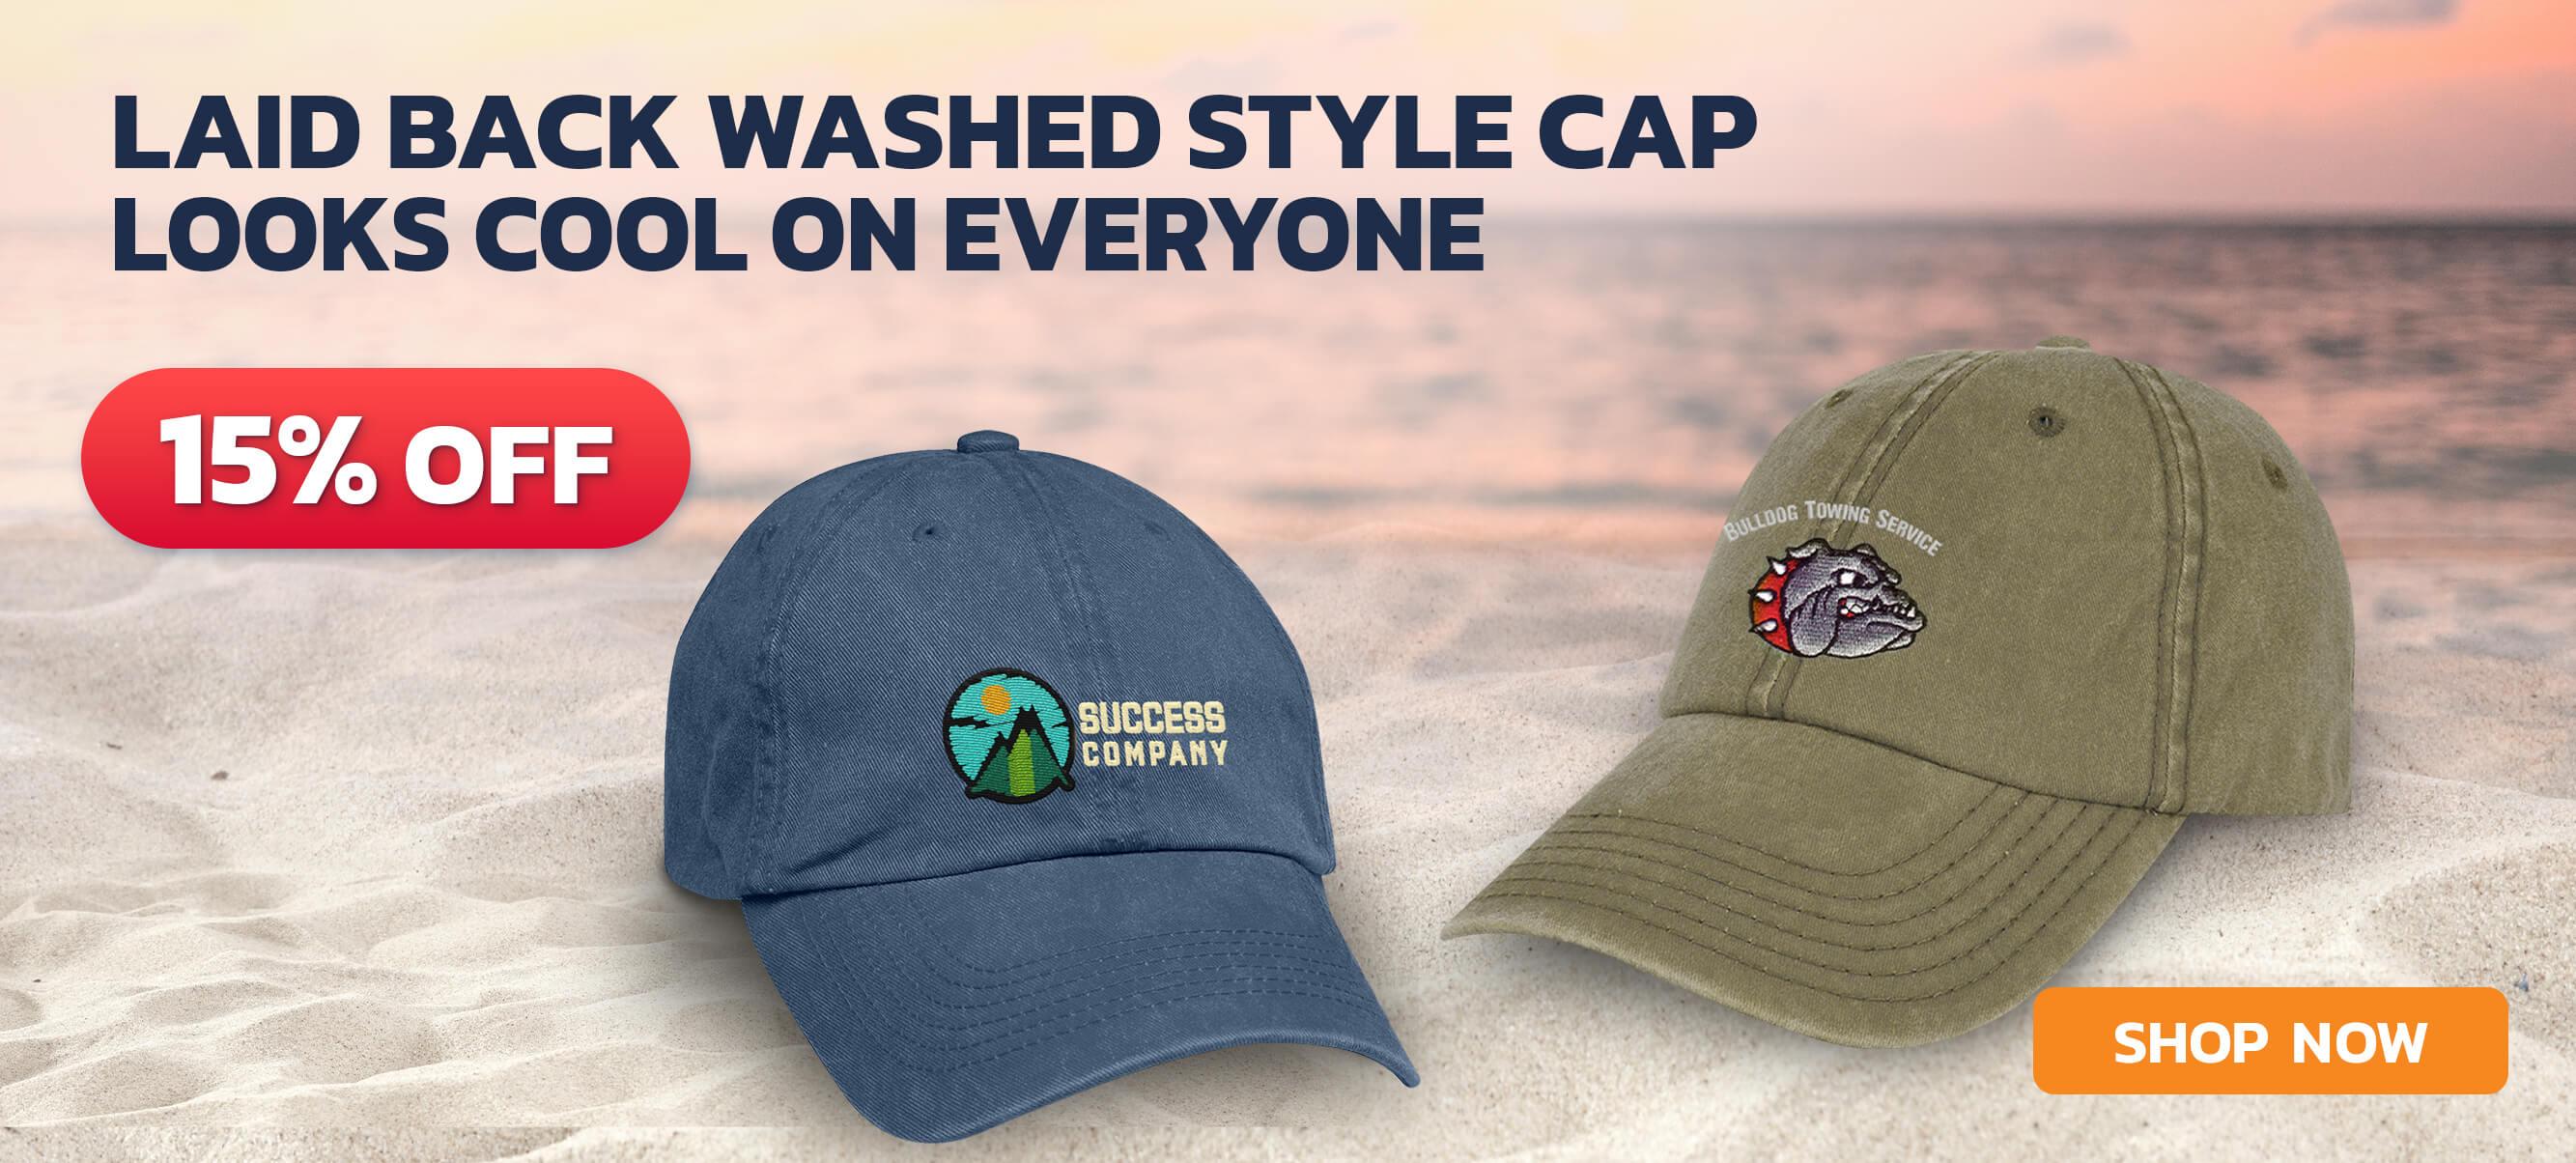 Laid_back_washed_style_cap_looks_cool_on_everyone